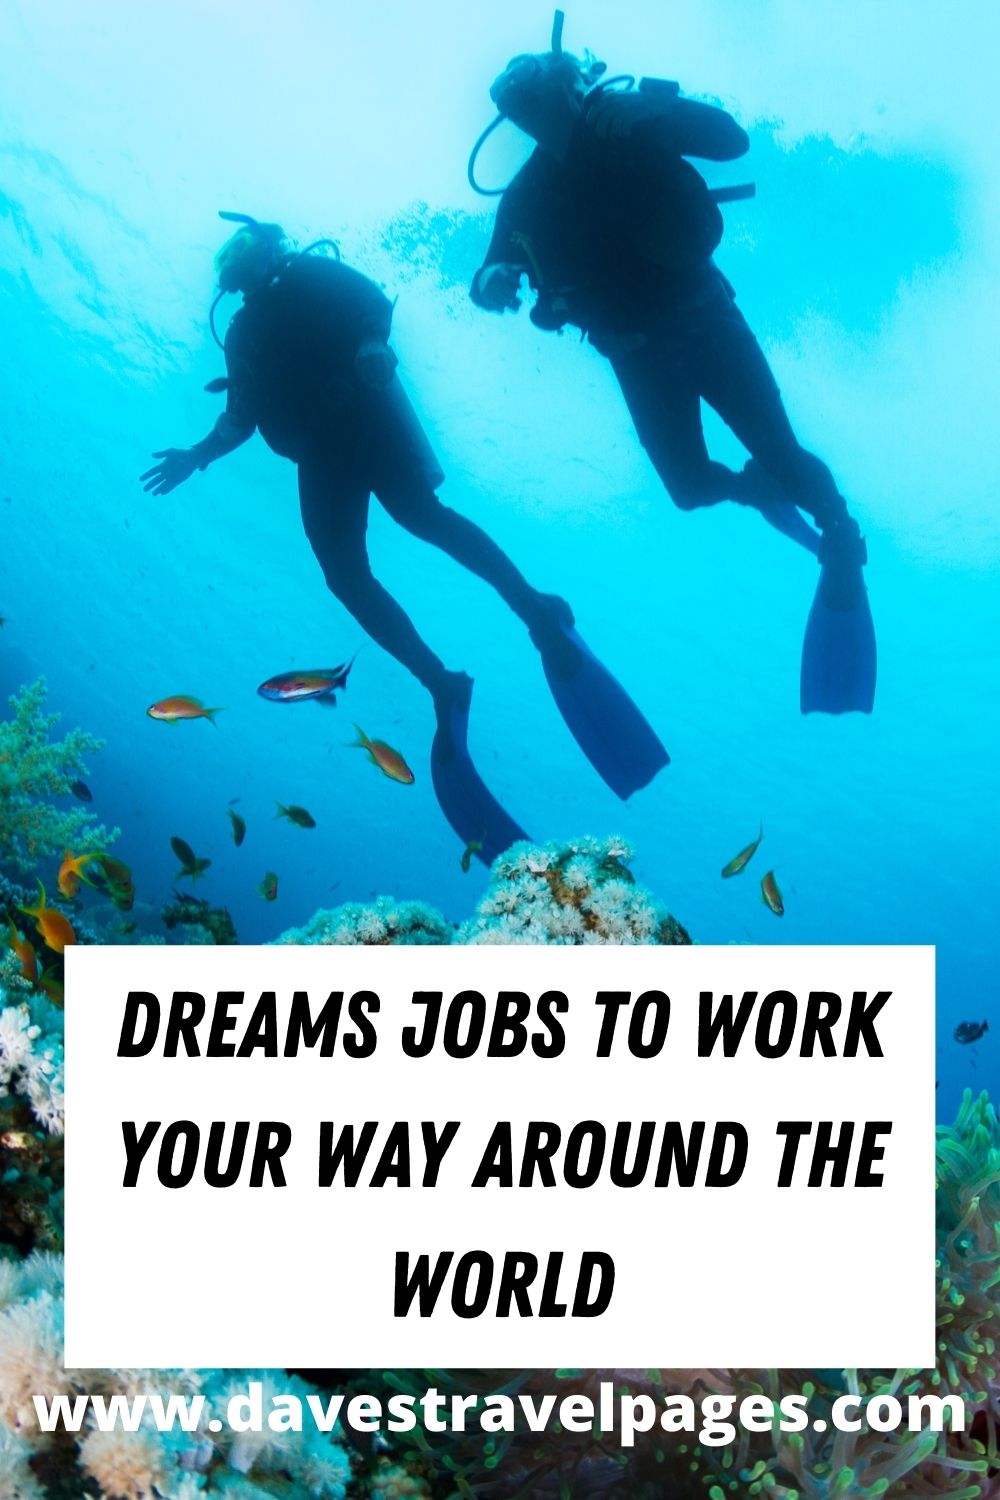 Dreams Jobs to work your way around the world